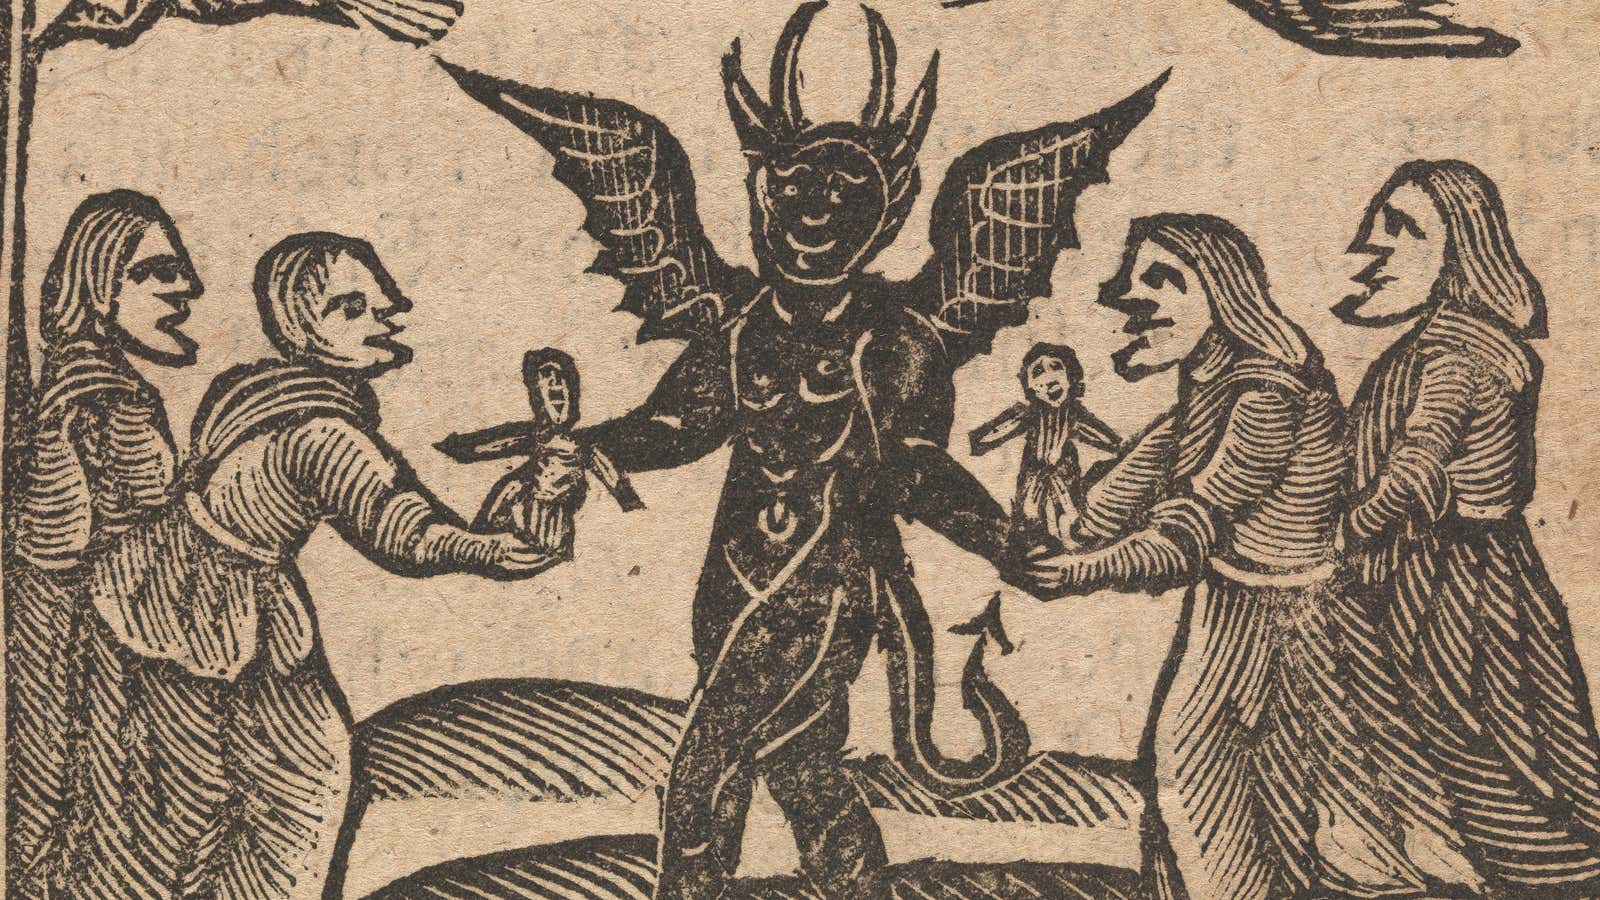 Protection against Satan and his witch-y minions was a hot commodity in early modern Europe.